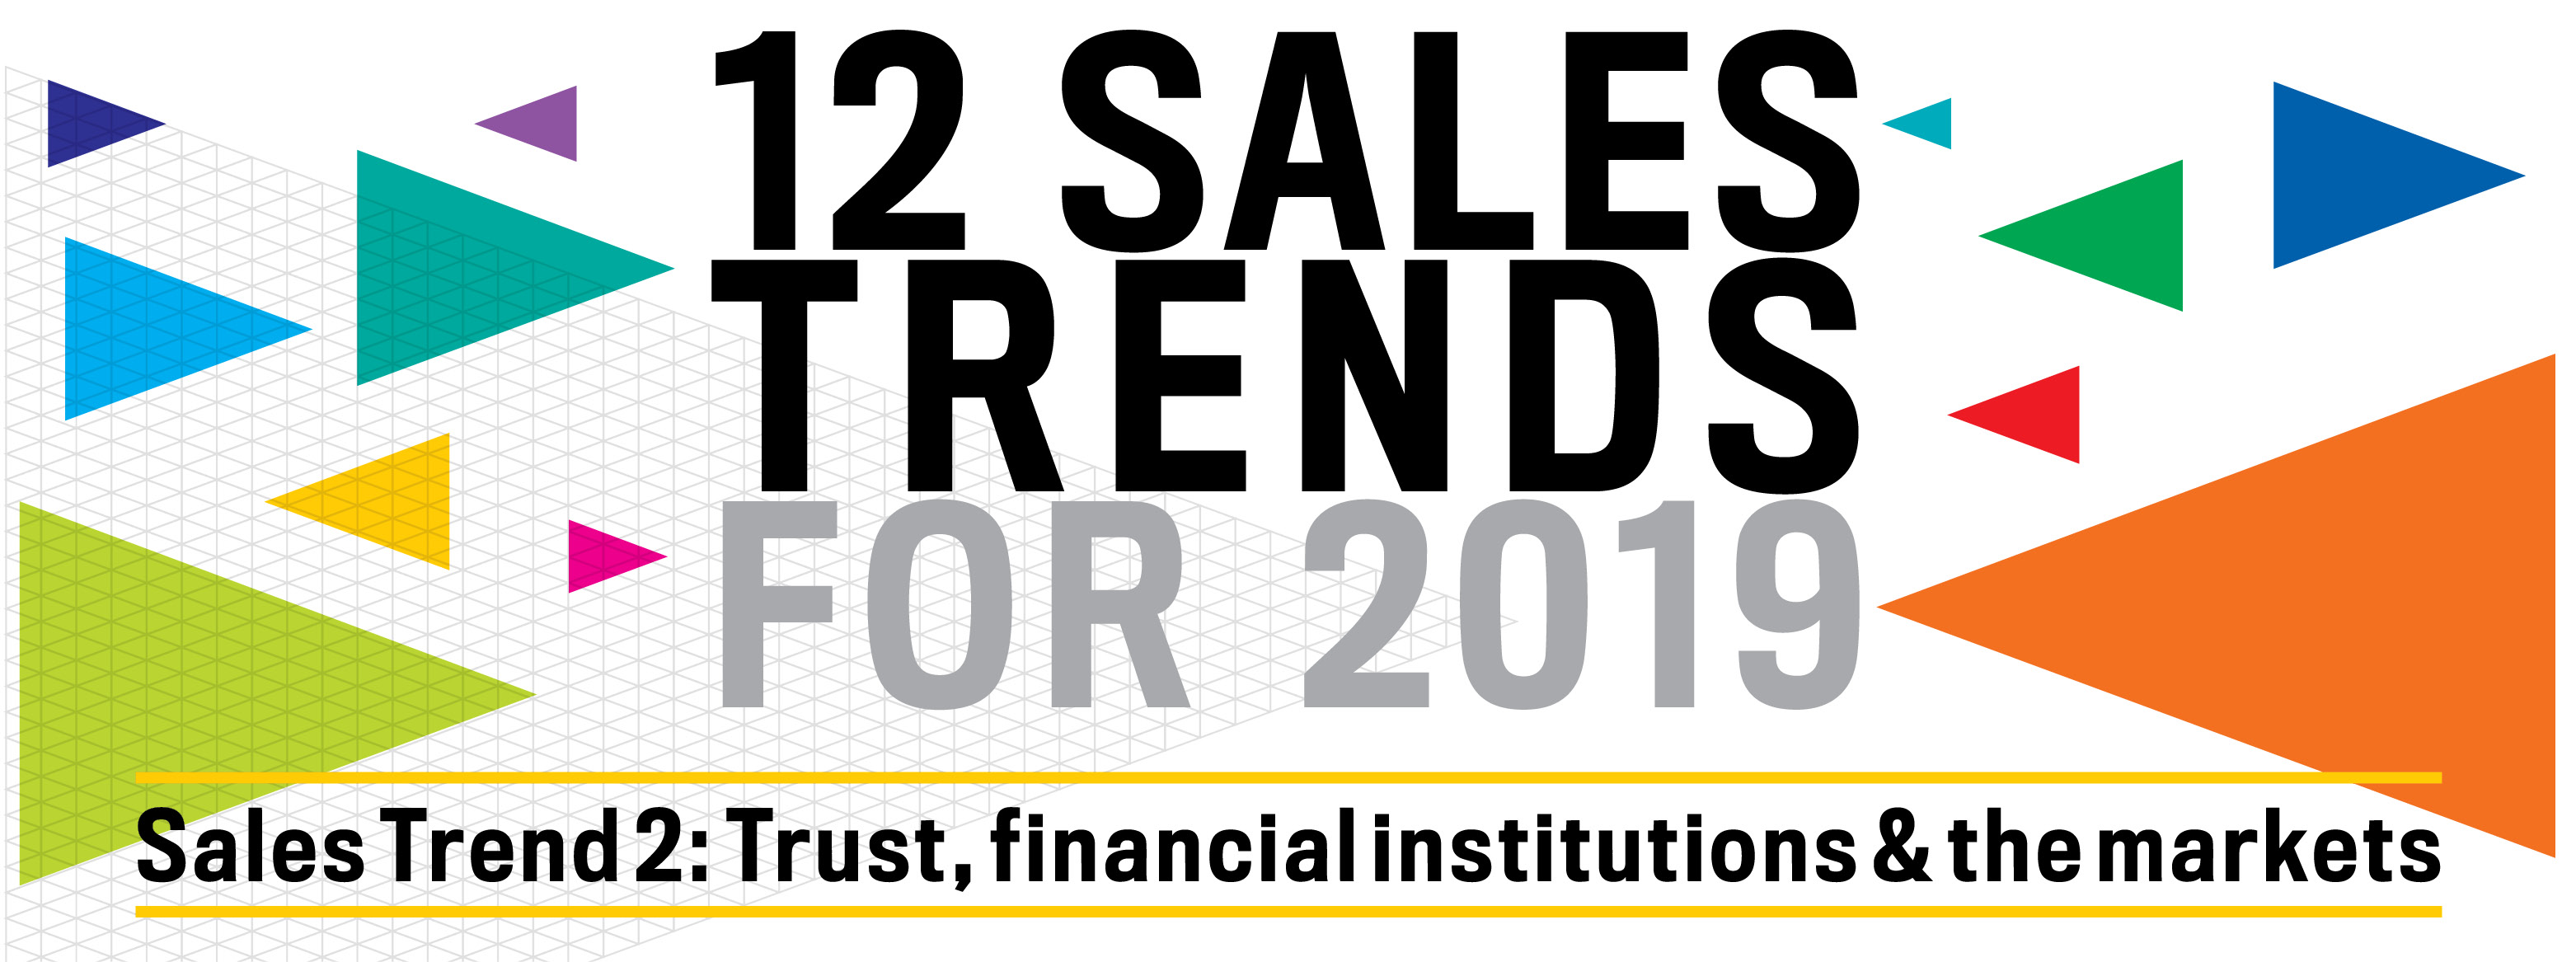 barrett_sales_trends_2019_Trend_2_Trust_ financial_institutions_and_the_markets